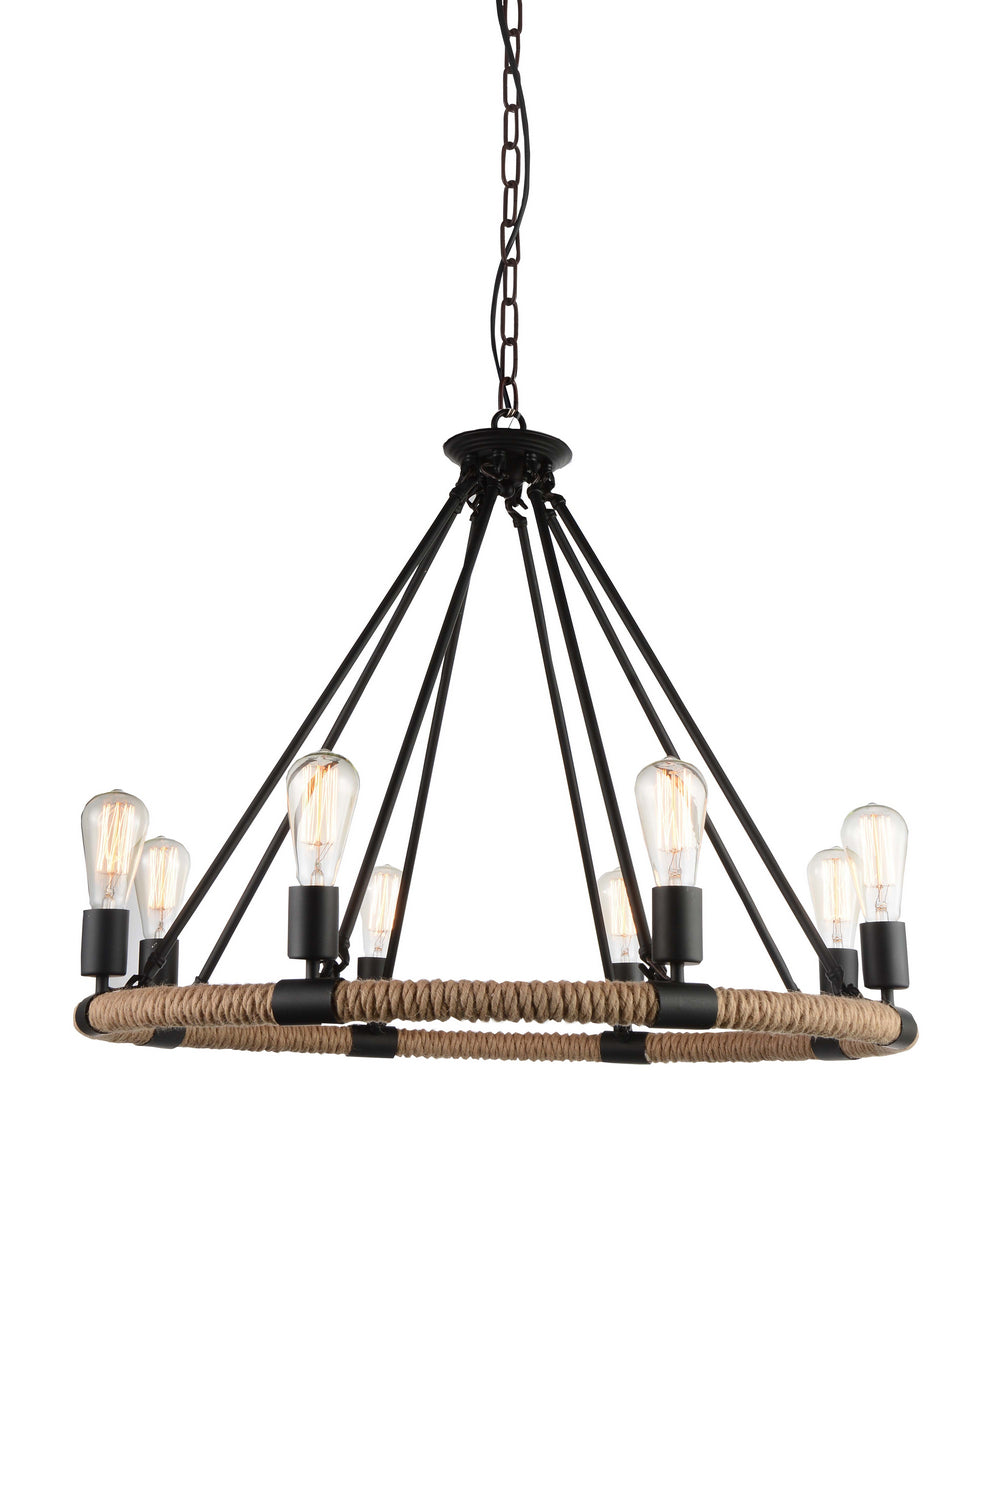 CWI Lighting Eight Light Chandelier from the Ganges collection in Black finish